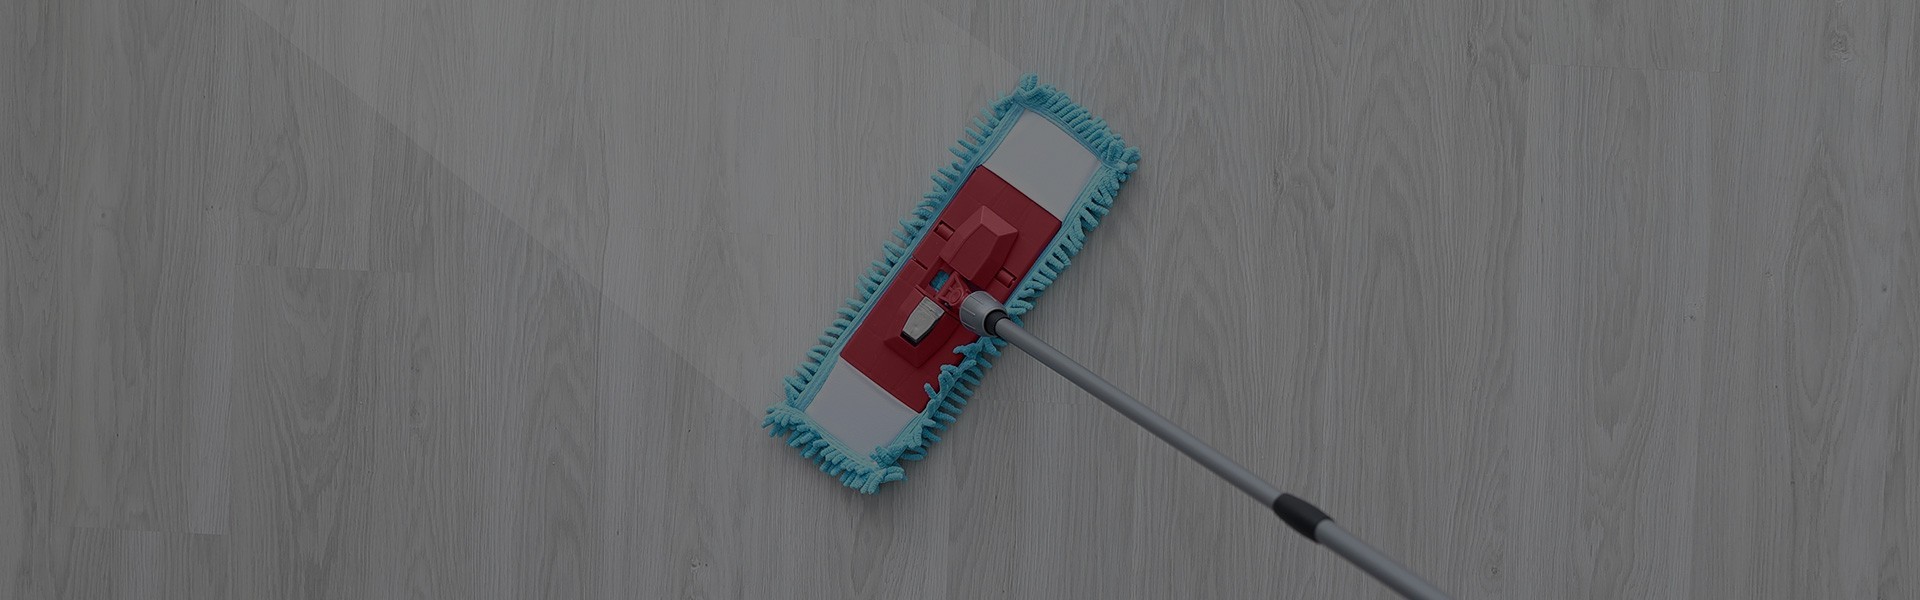 Floor mops and cleaners